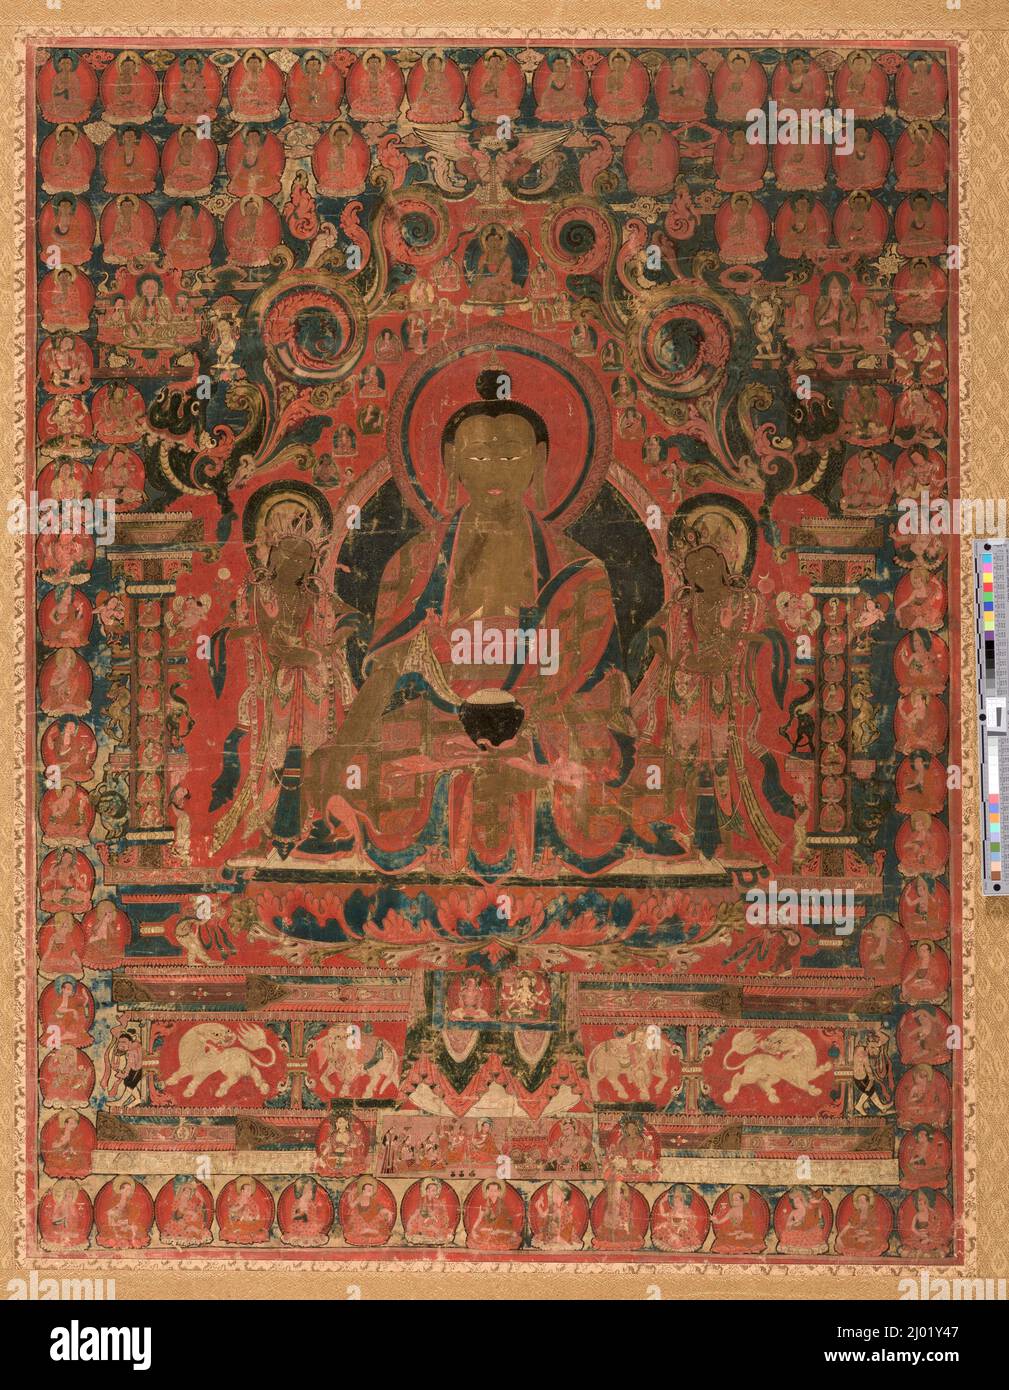 The Supreme Physician (Bhaishajyaguru) and His Celestial Assembly. Western Tibet, Guge, 15th century. Paintings. Mineral pigments on cotton cloth Stock Photo